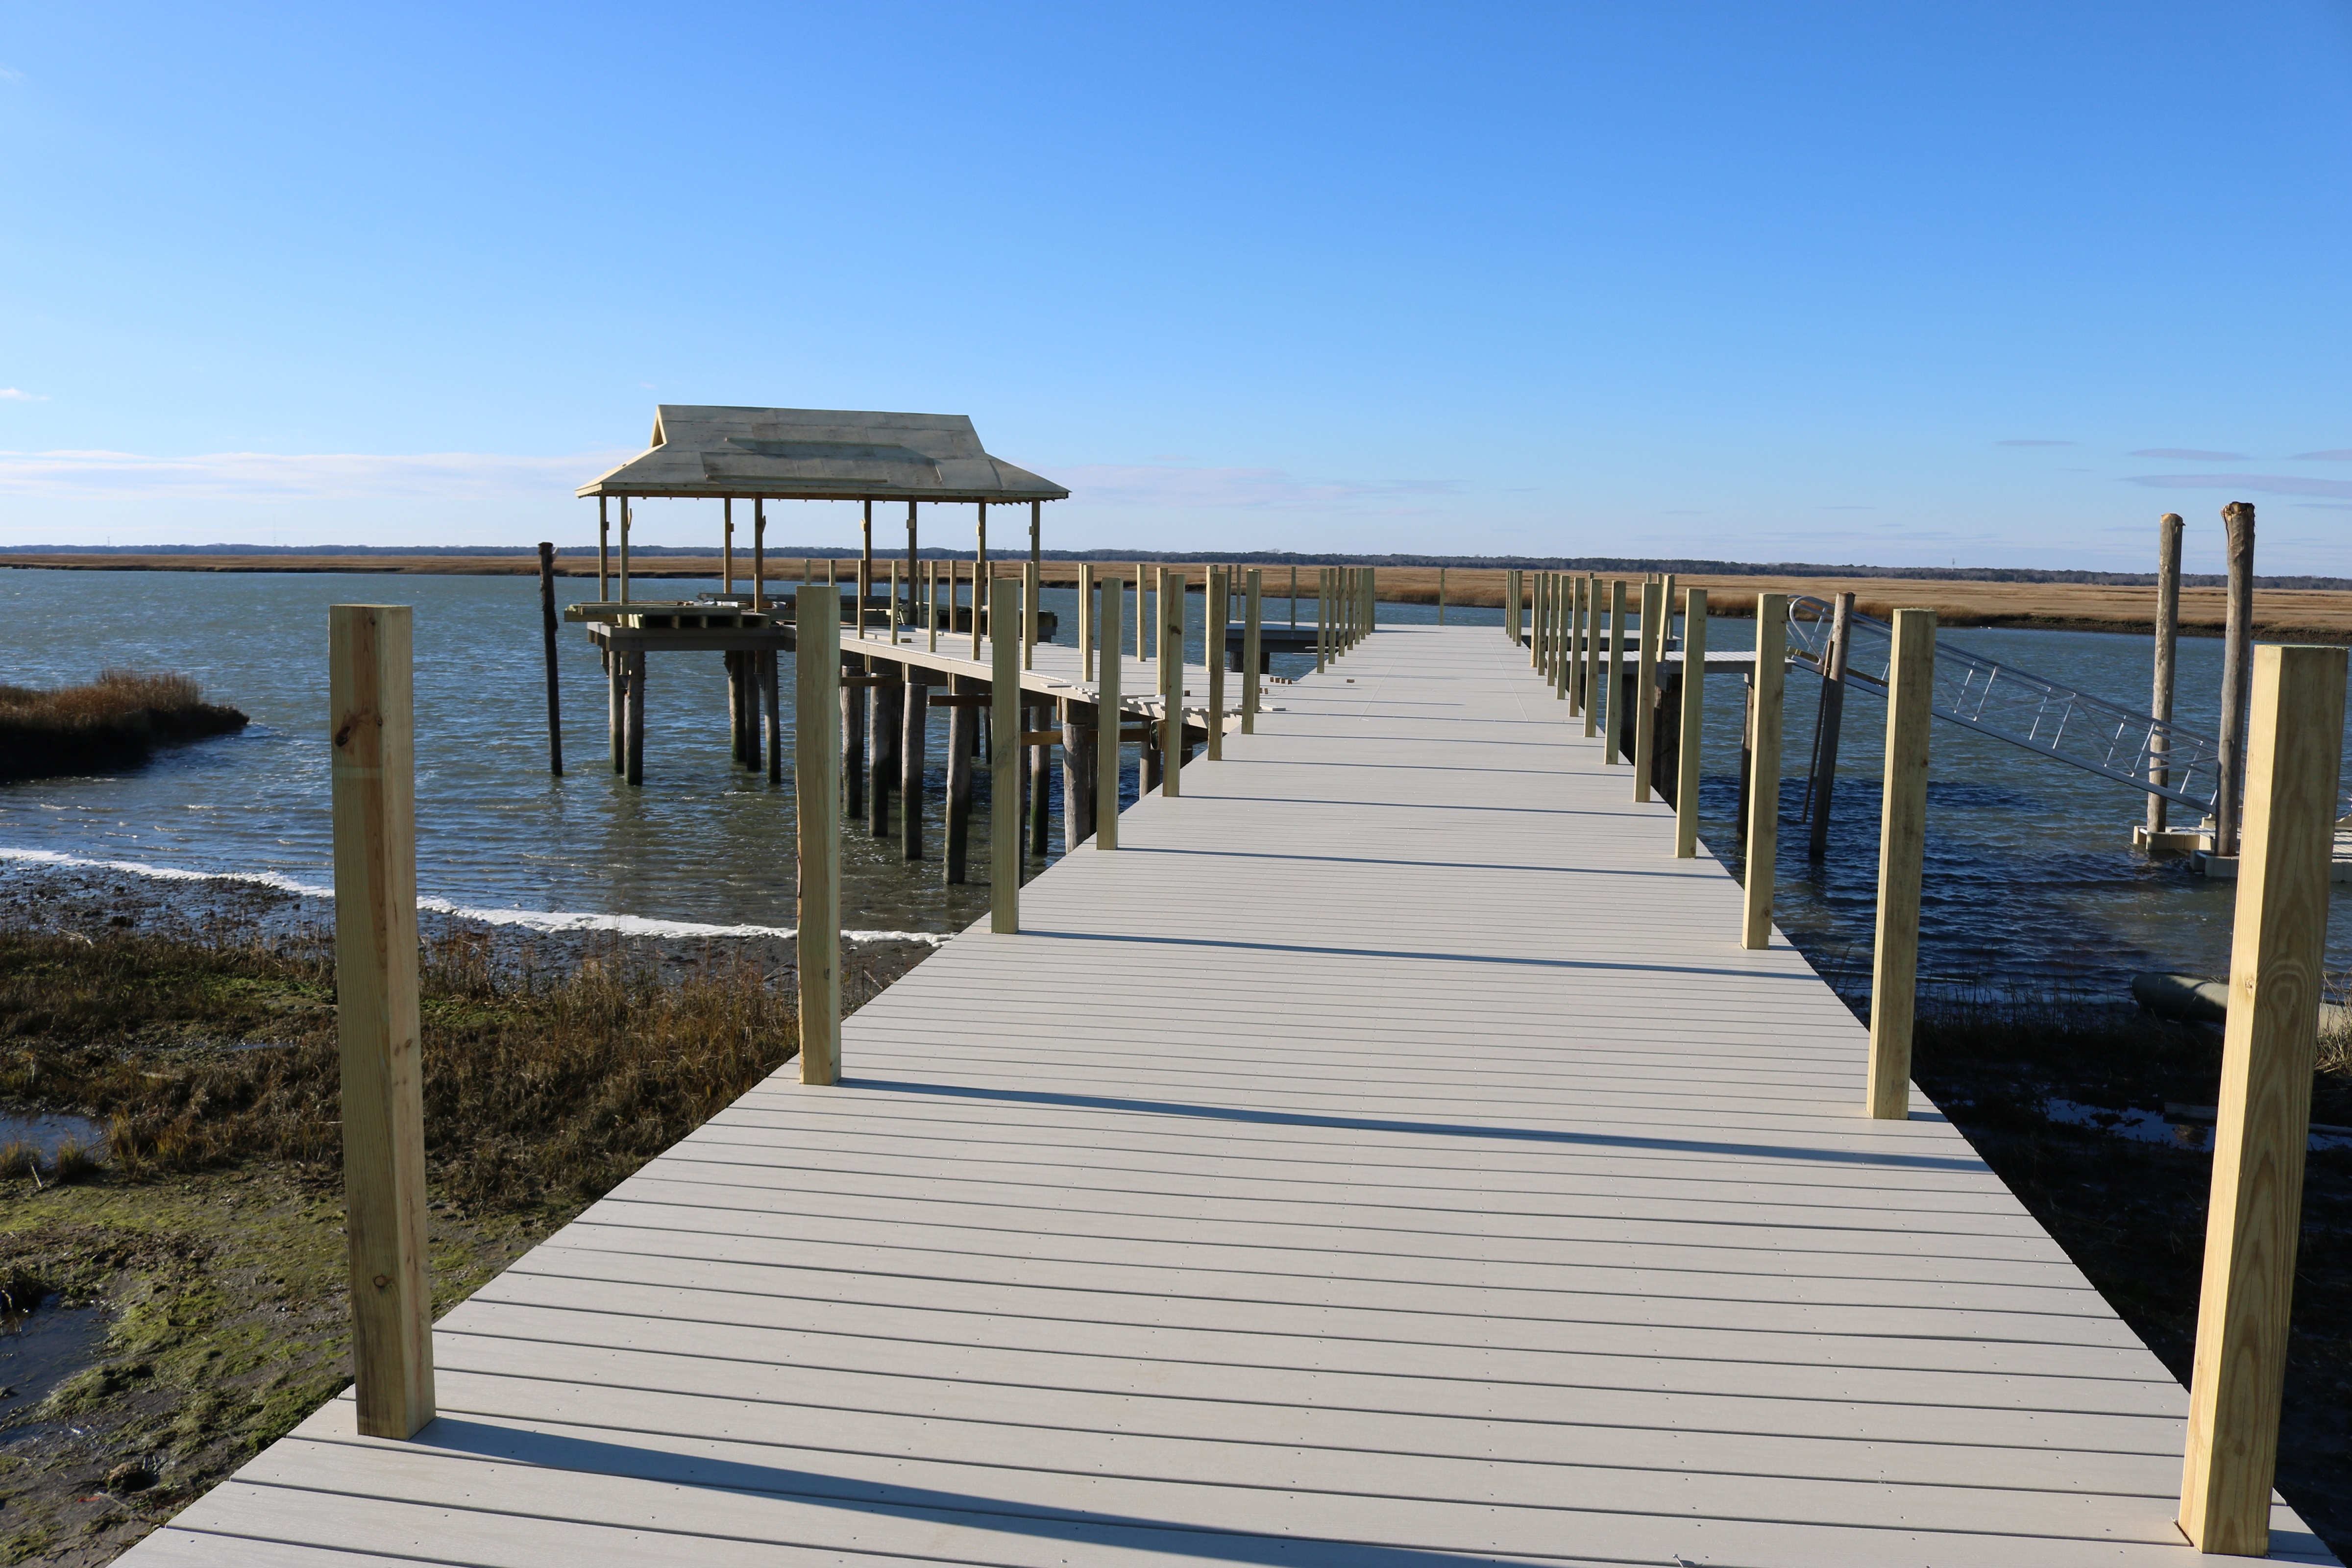 Kayak Launch Site, Fishing Pier Ready in Spring | Sea Isle News